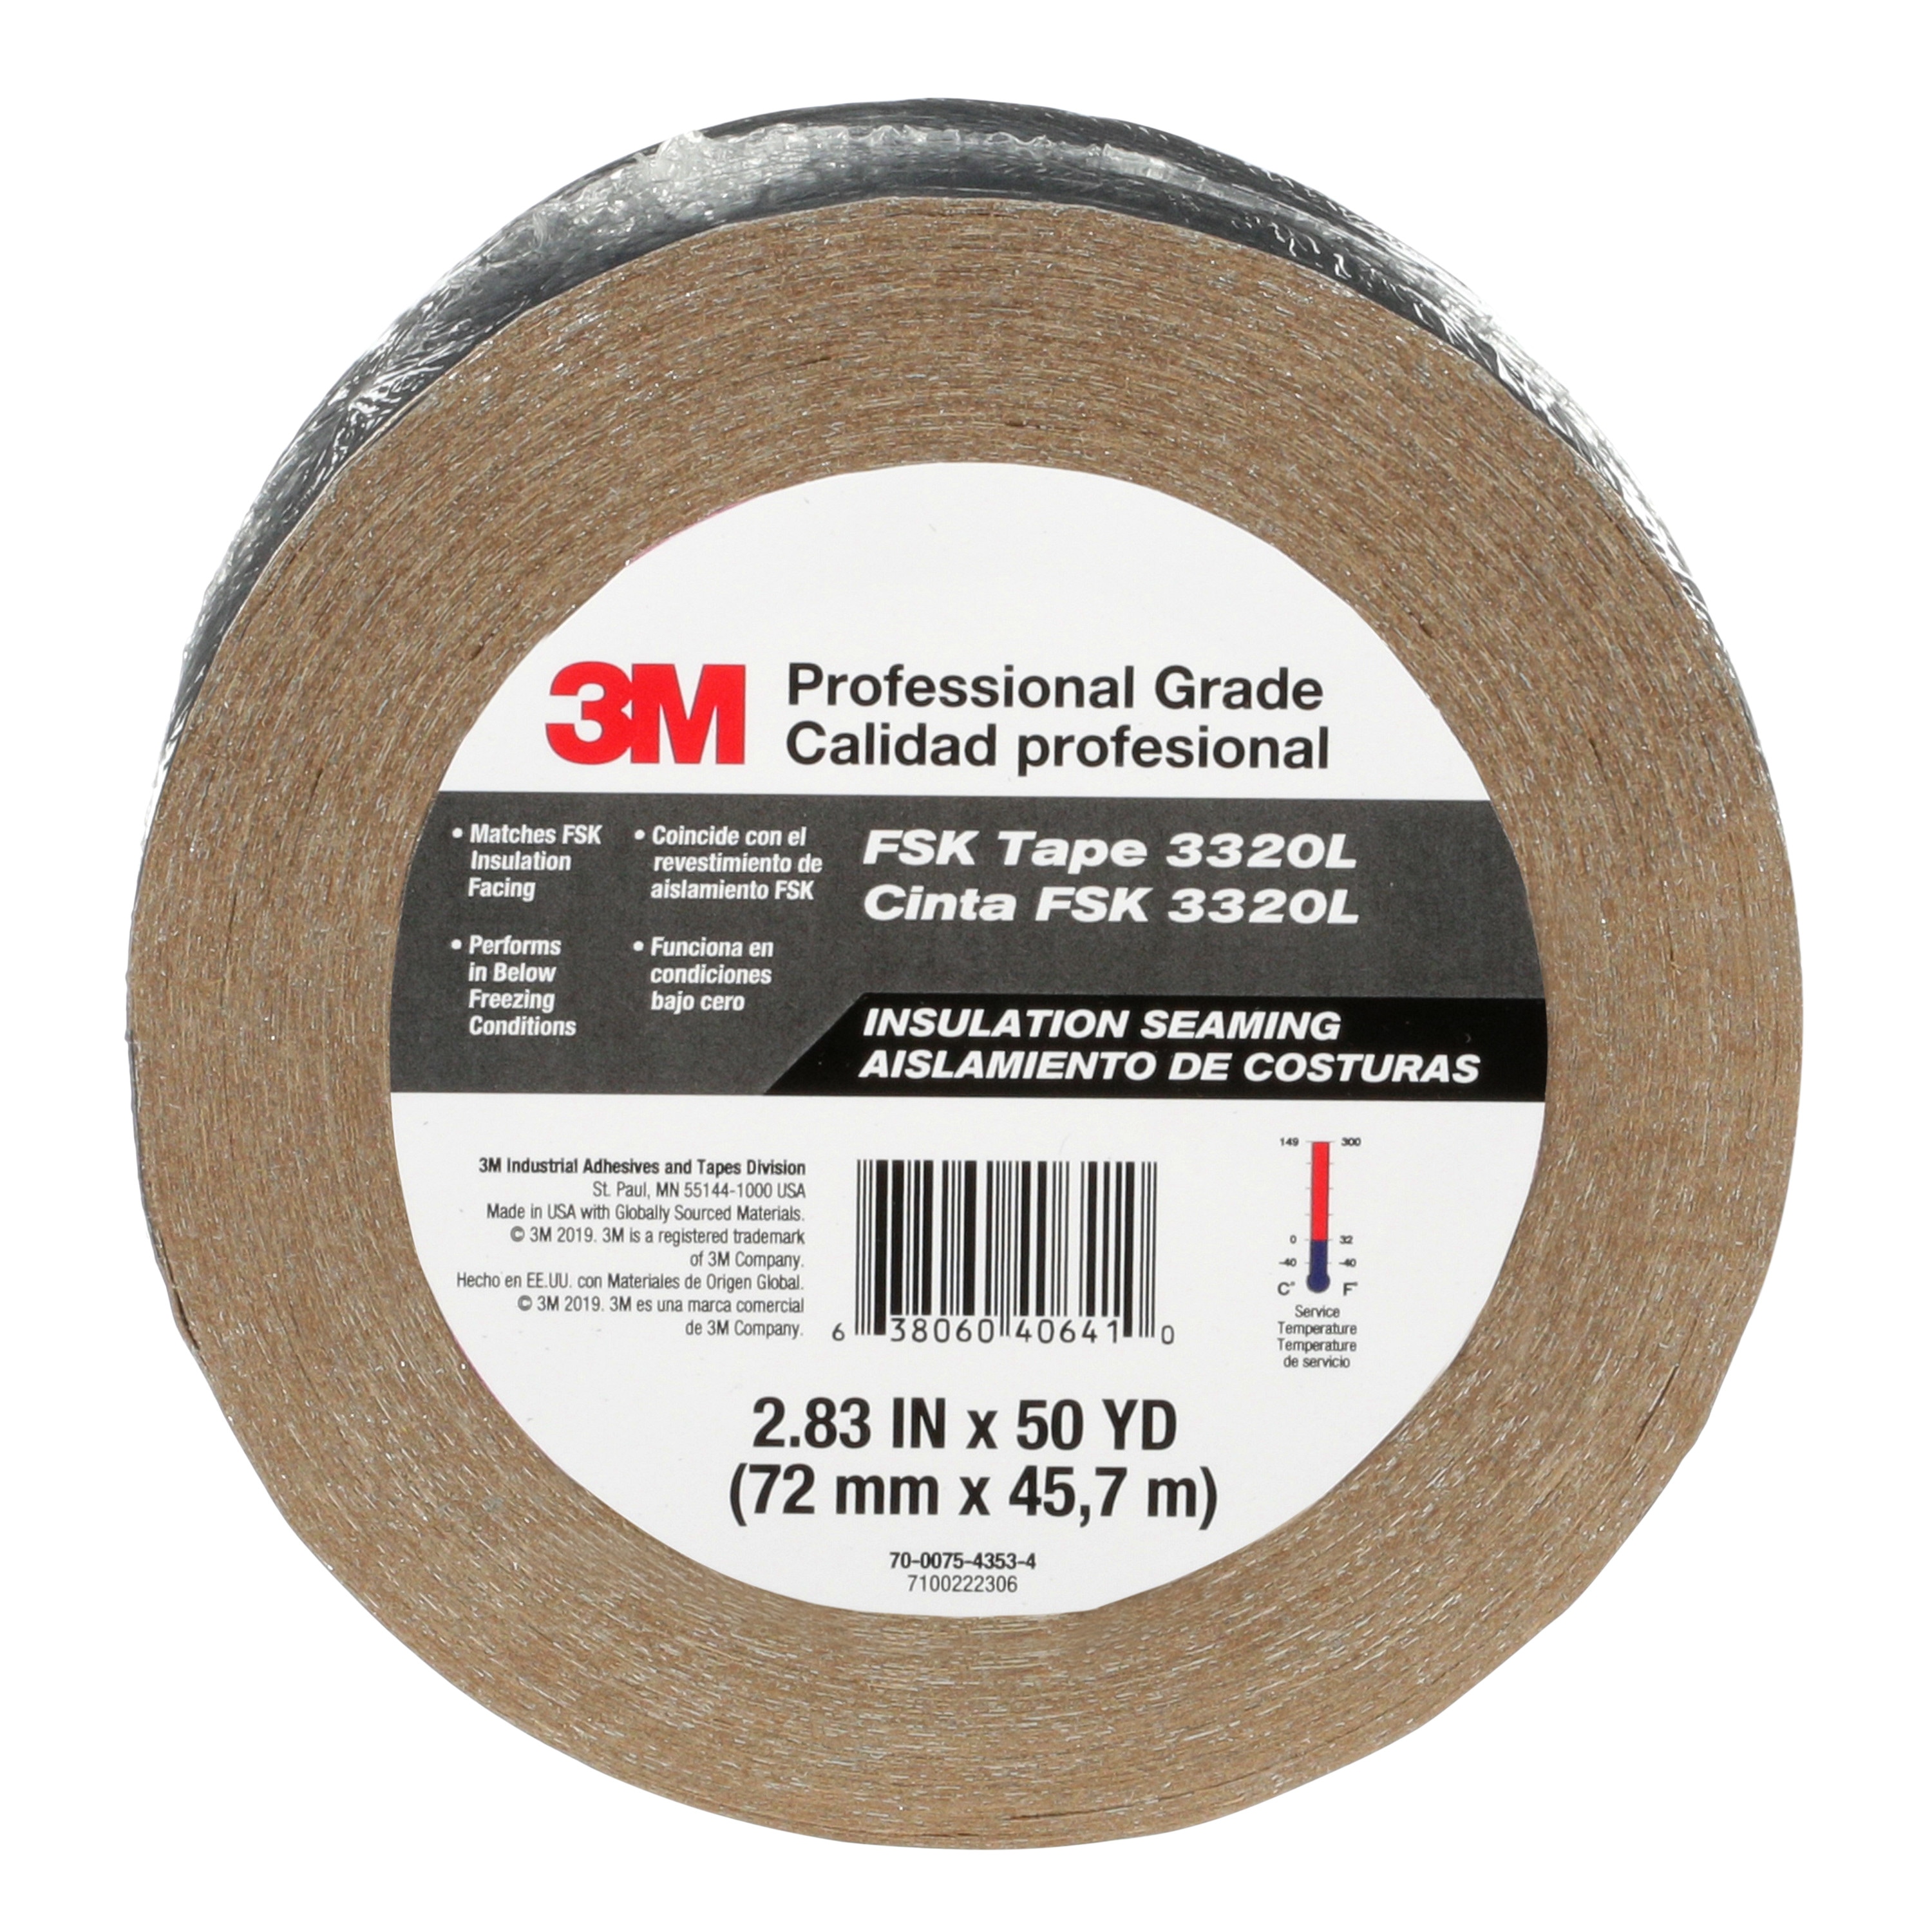 WOD Metalized Polyester Tape, In Stock, Ships Today - Tape Providers